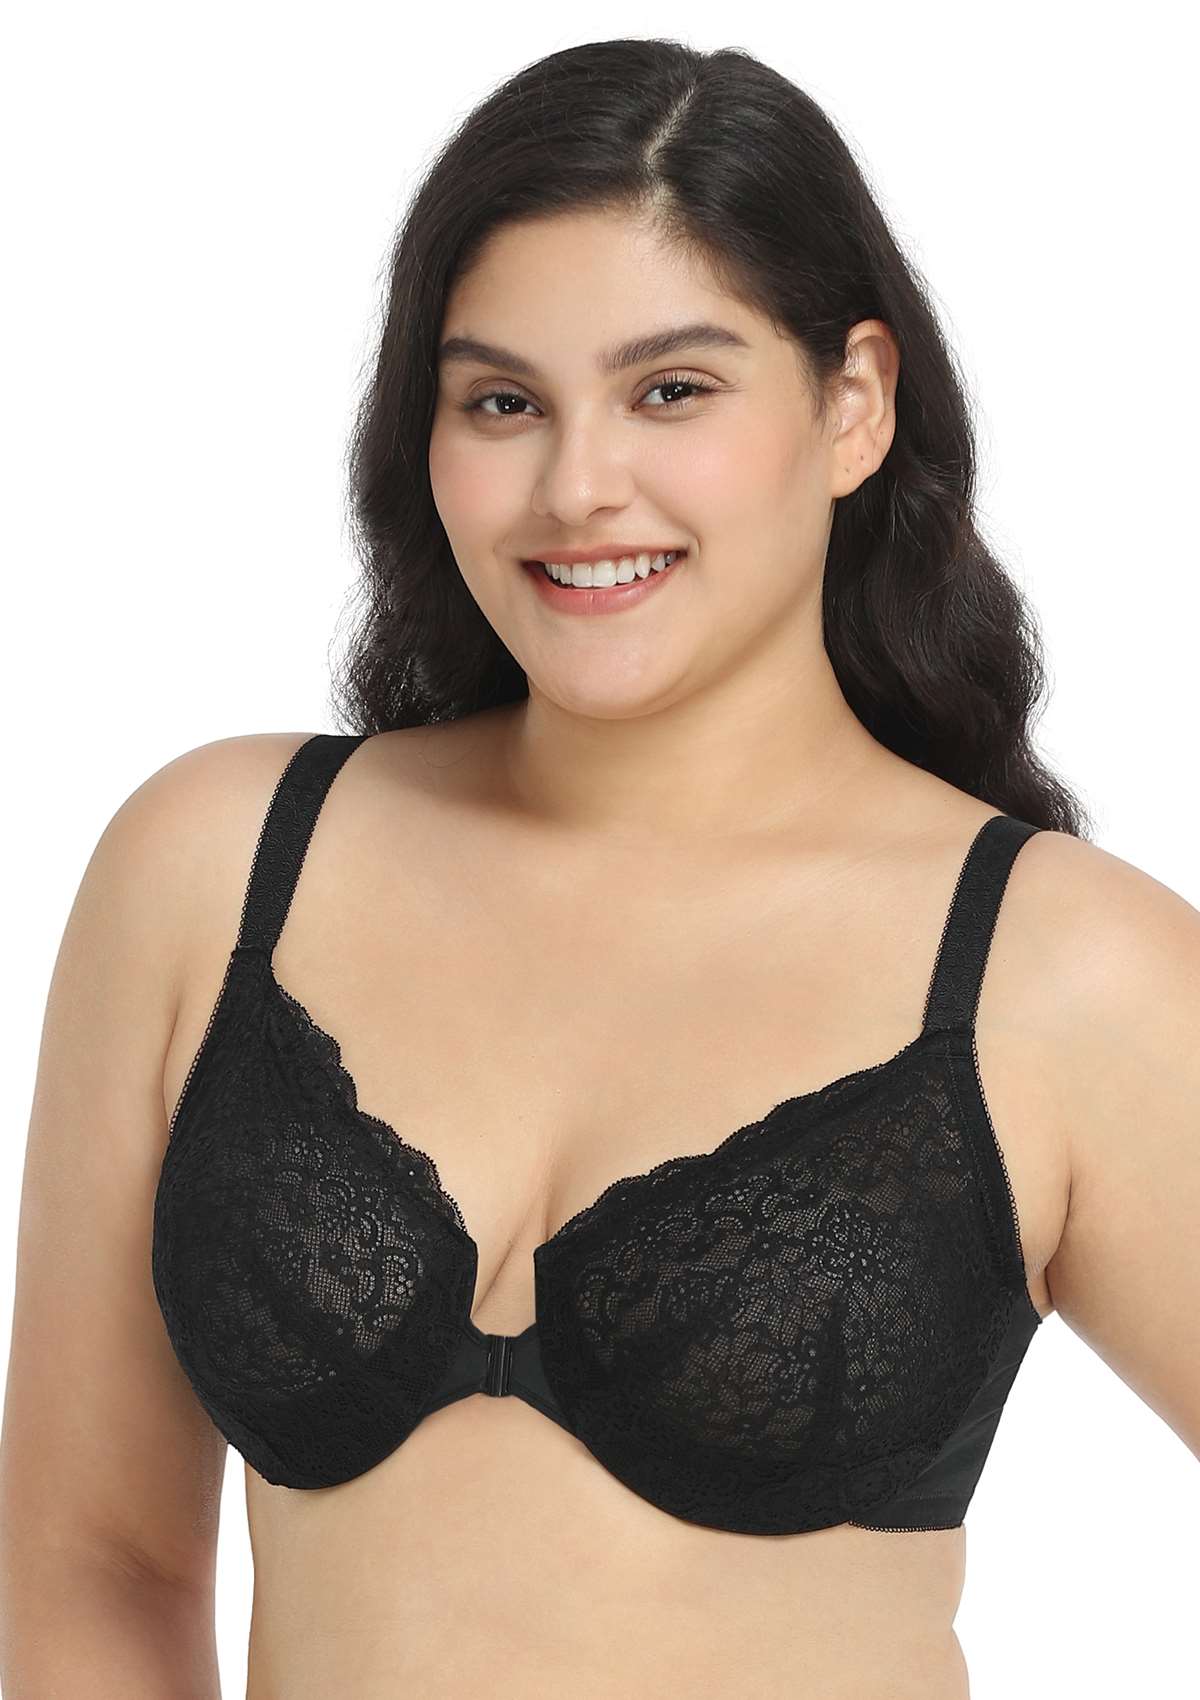 HSIA Nymphaea Front-Close Unlined Retro Floral Lace Back Smoothing Bra - Black / 42 / DD/E